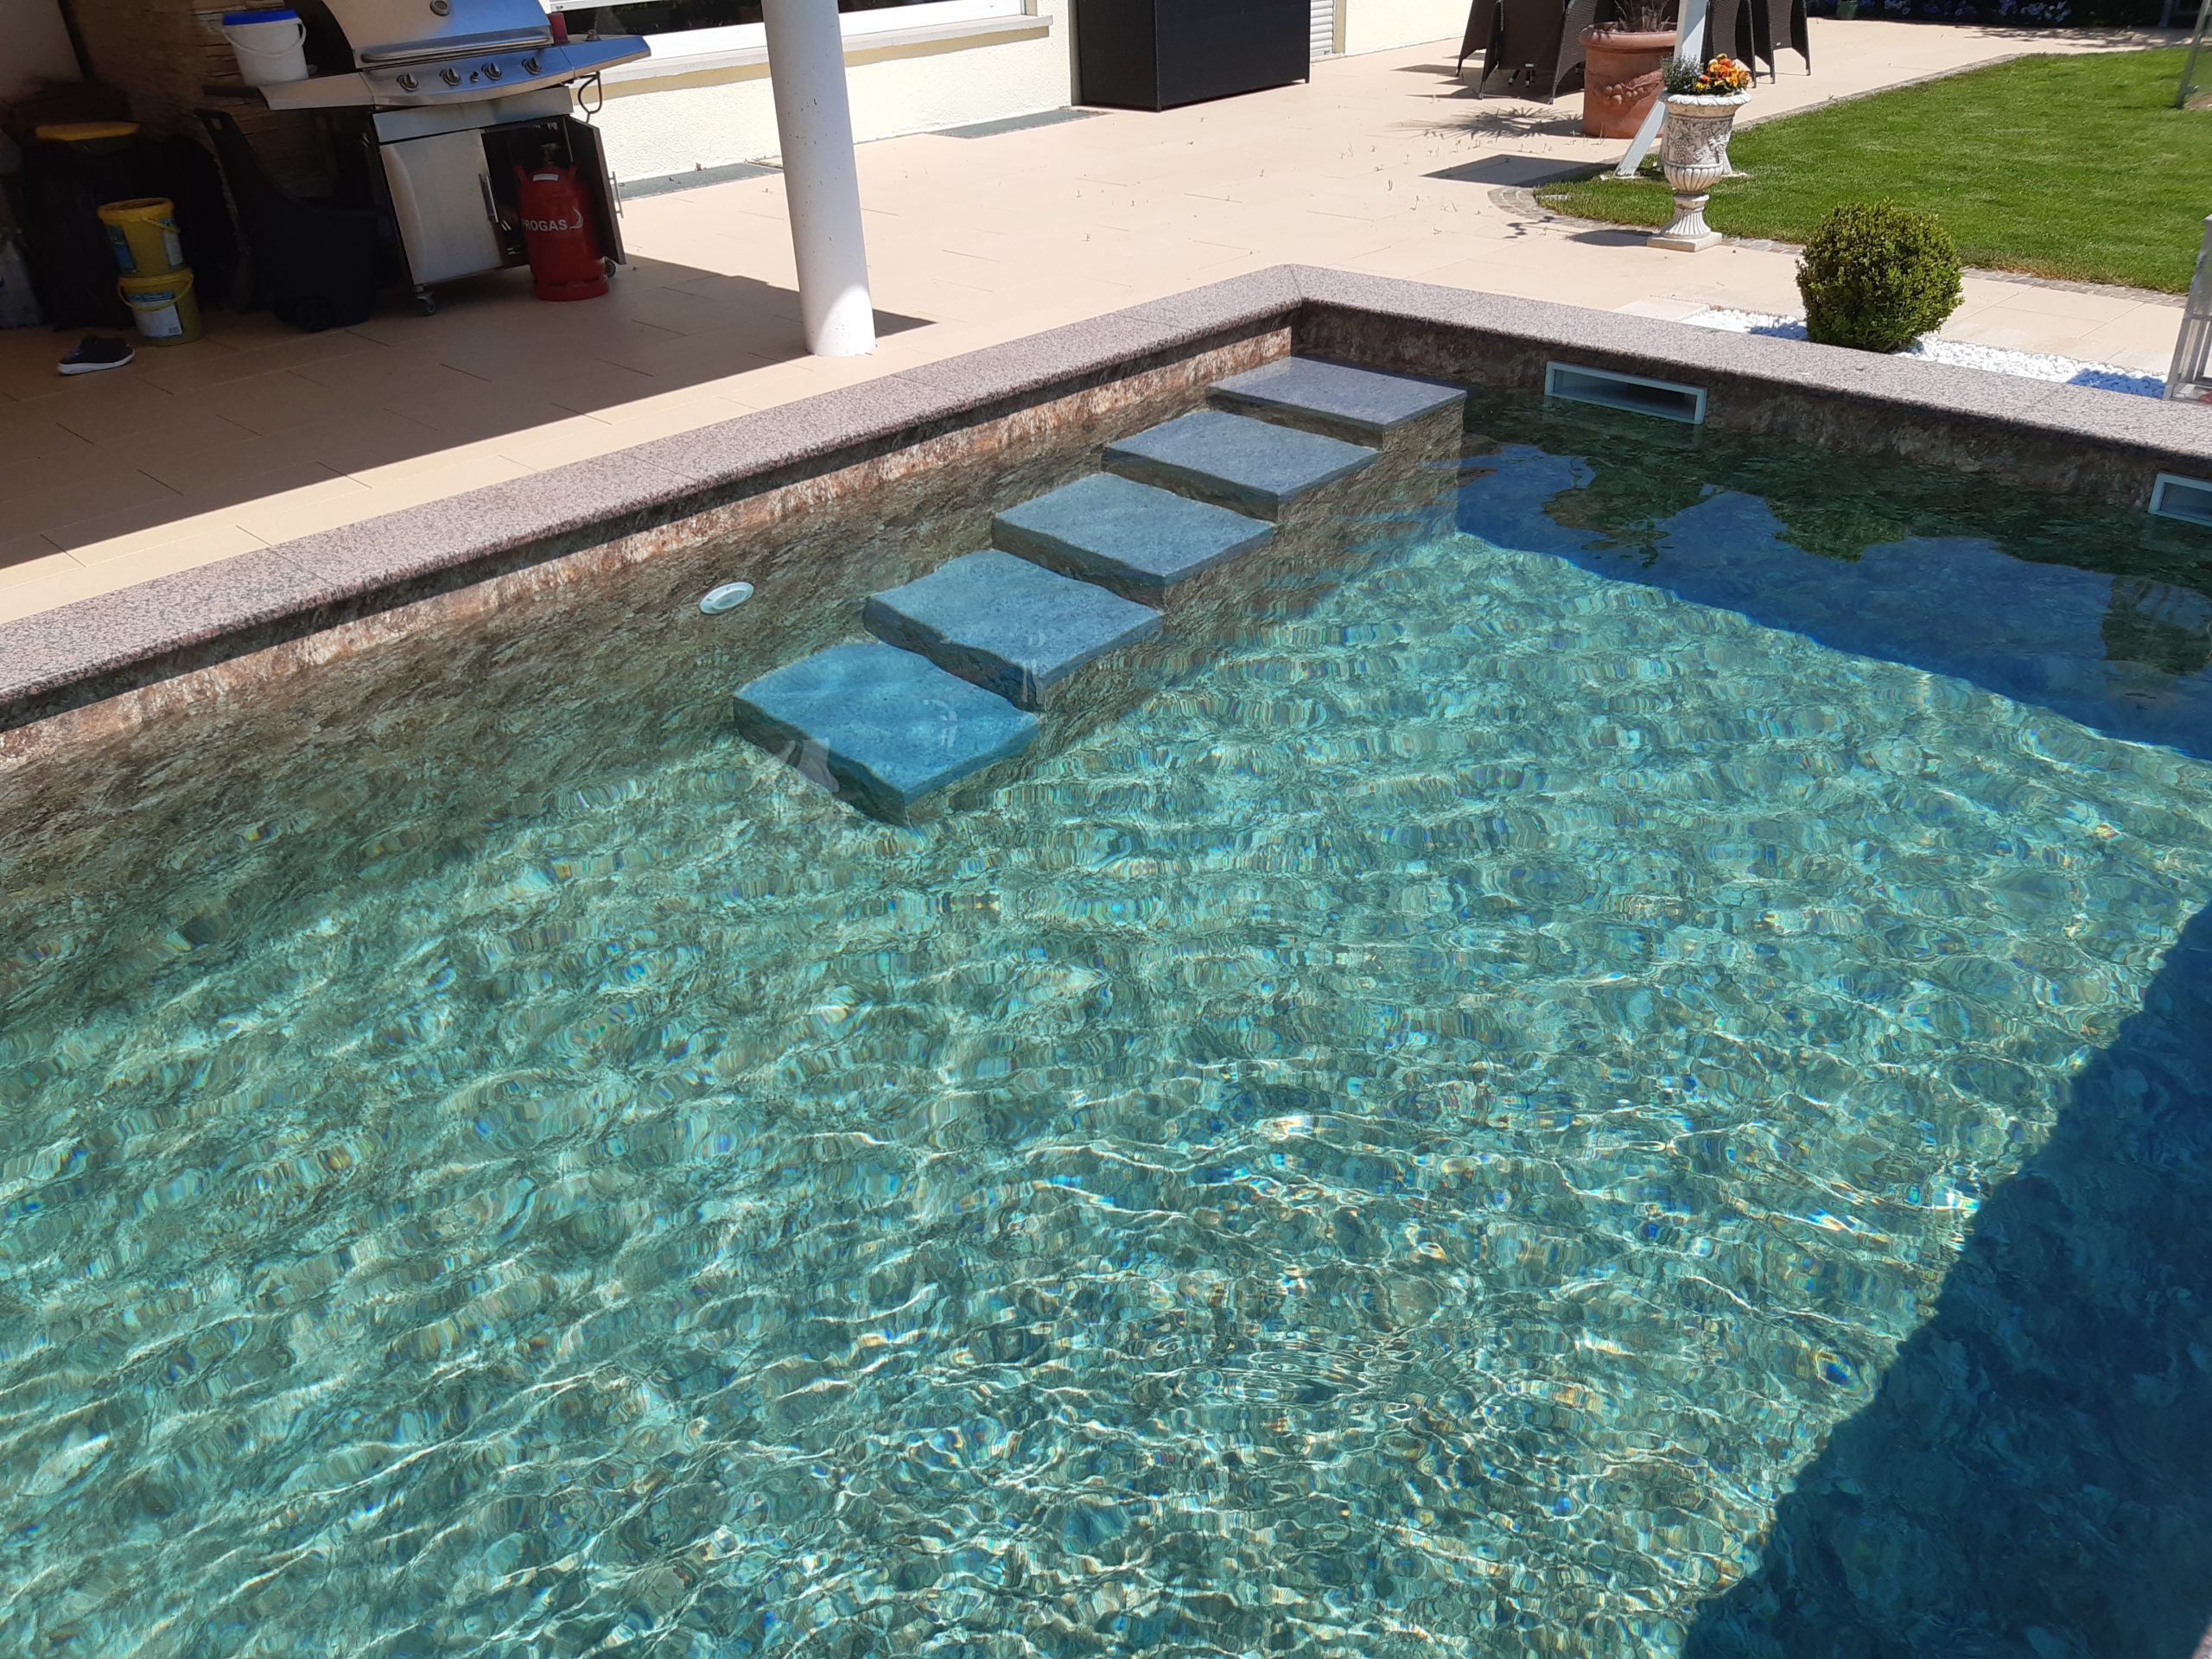 You are currently viewing Pool mit RENOLIT ALKORPLAN TOUCH Folie in Lollar (2)